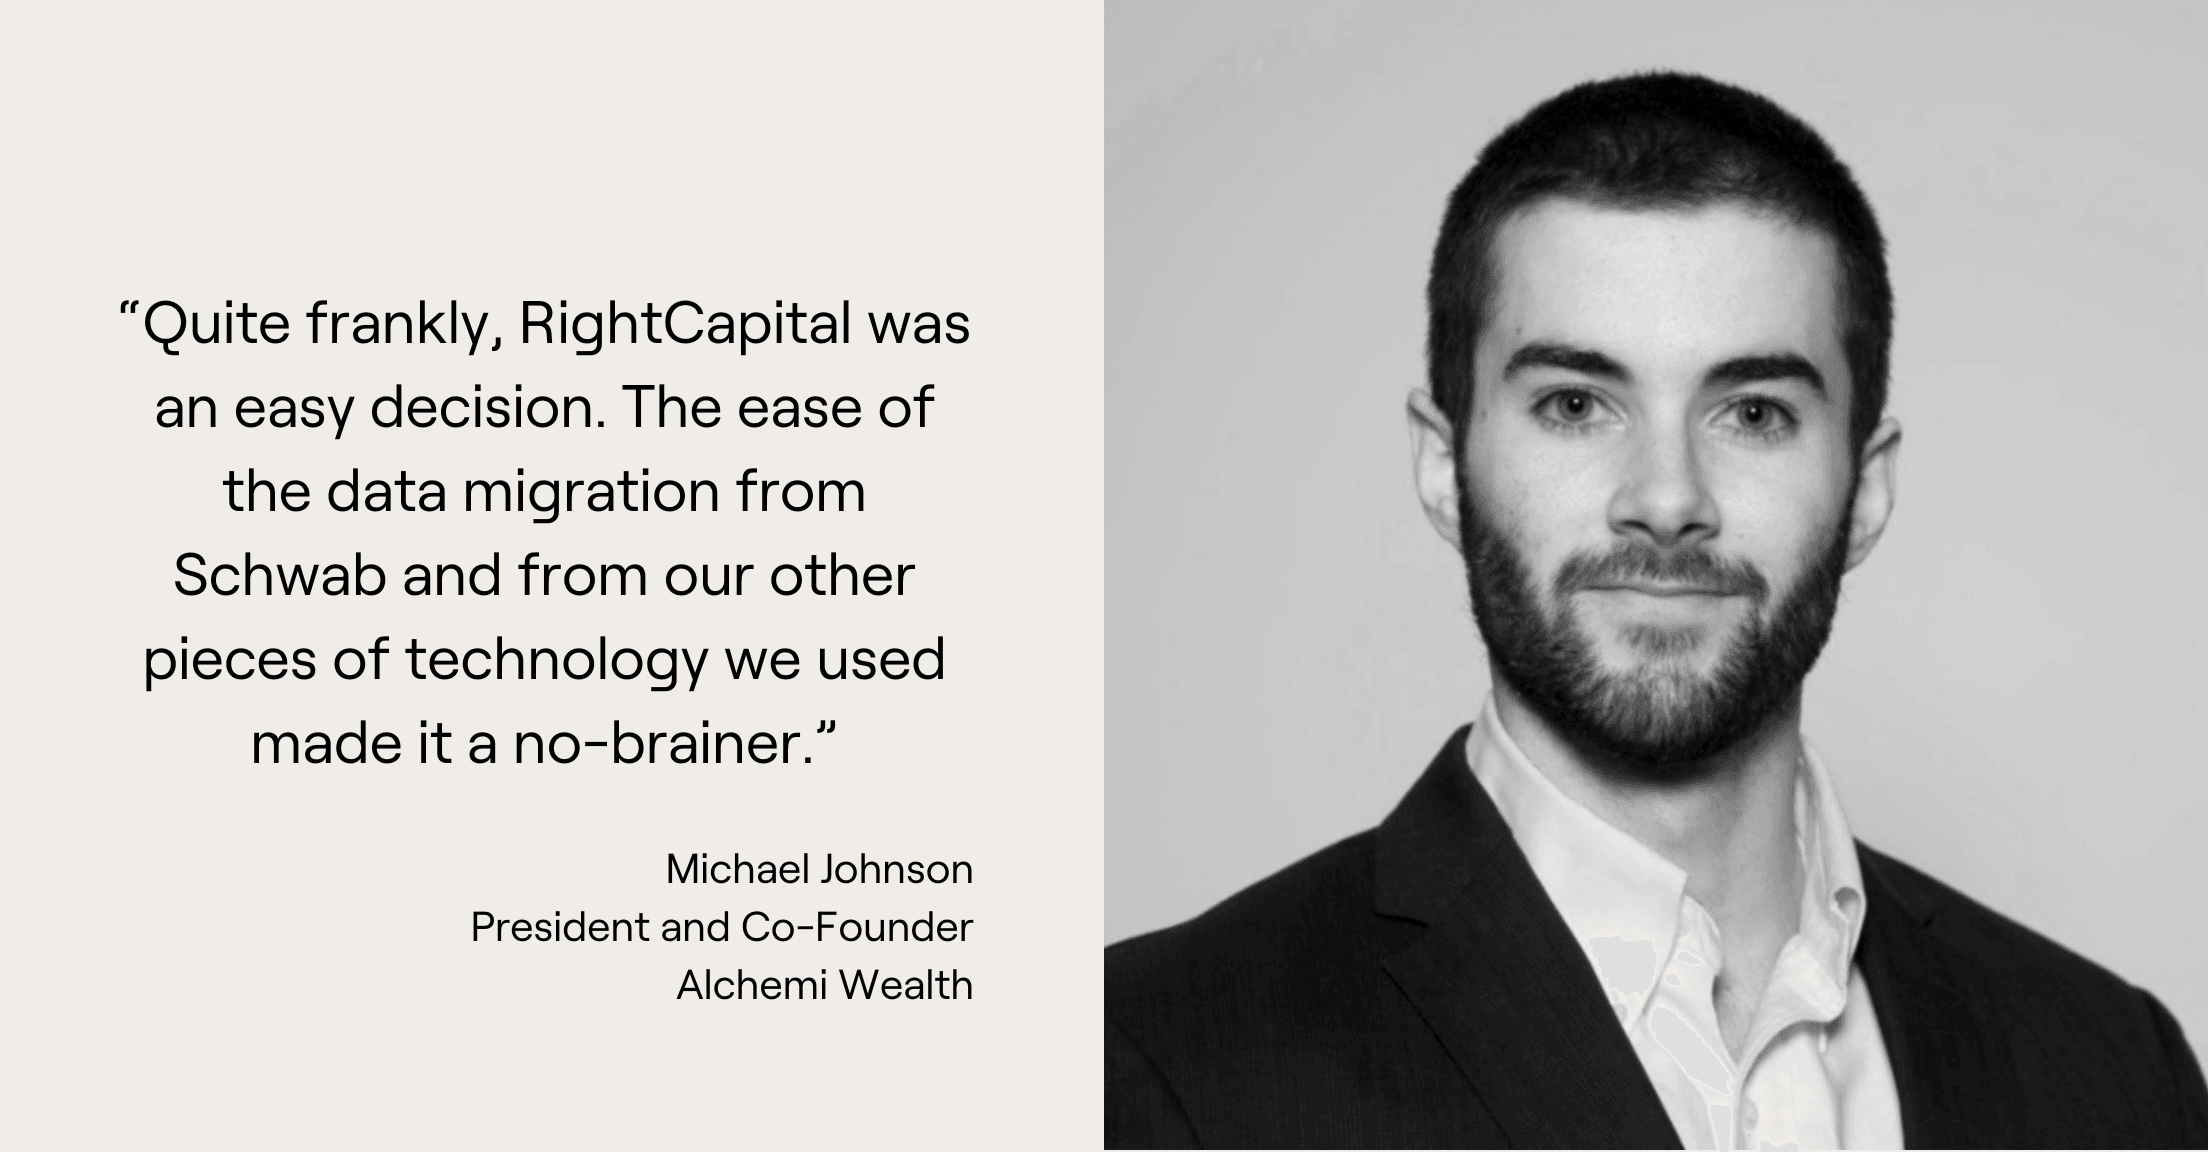 Headshot of Michael Johnson of Alchemi Wealth with quote, “Quite frankly, RightCapital was an easy decision. The ease of the data migration from Schwab and from our other pieces of technology we used made it a no-brainer.”